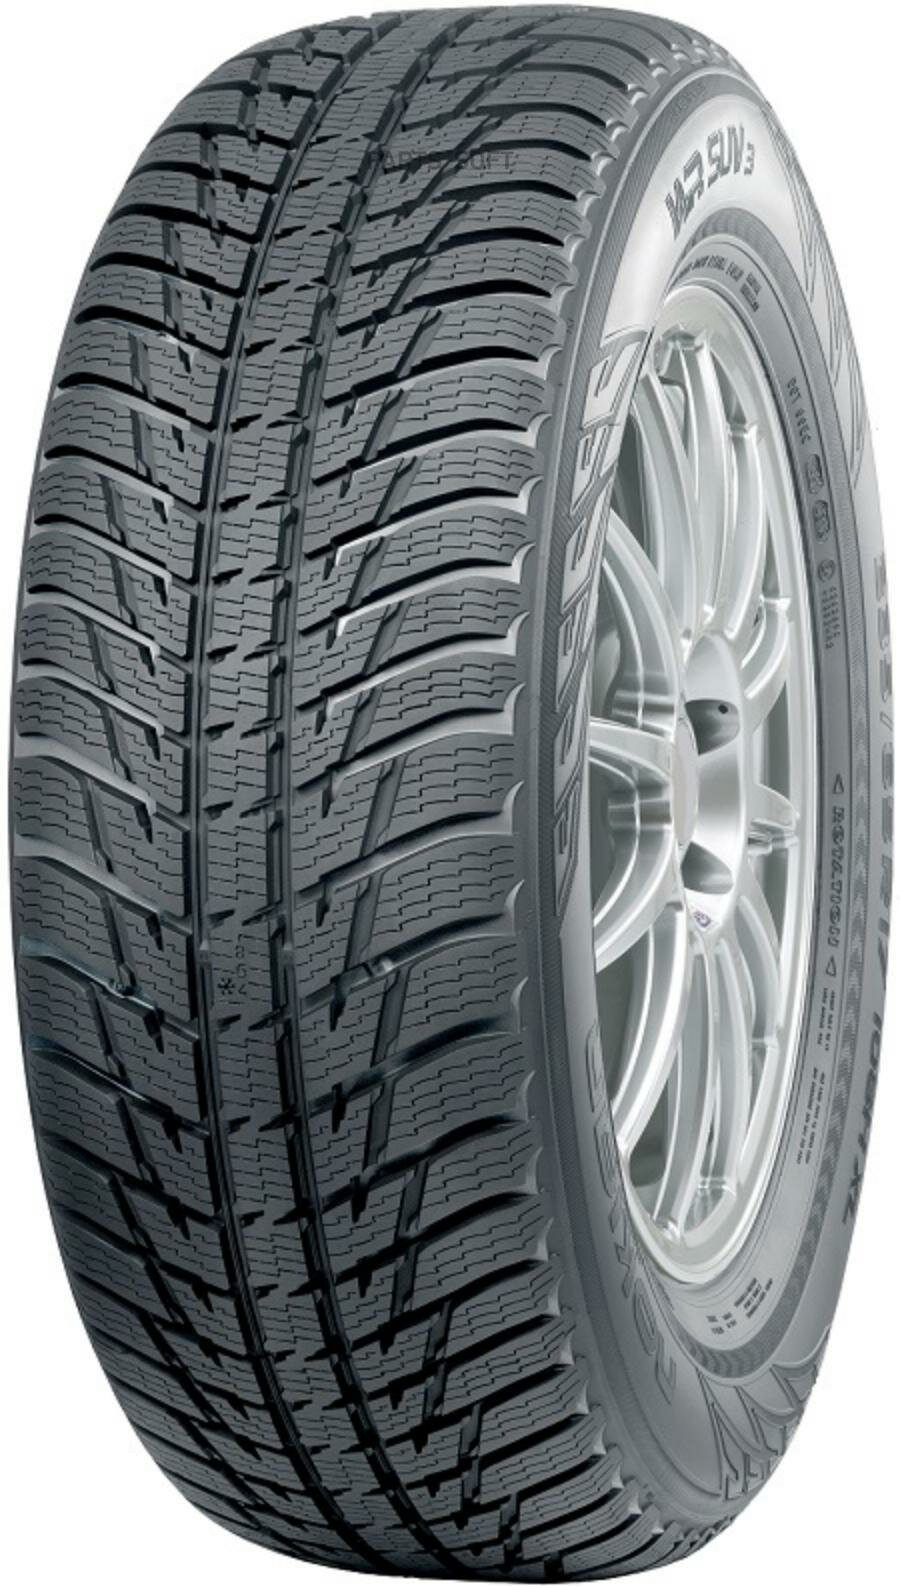 NOKIAN T428591 Nokian Tyres WR SUV 3 235/75-R15 105T